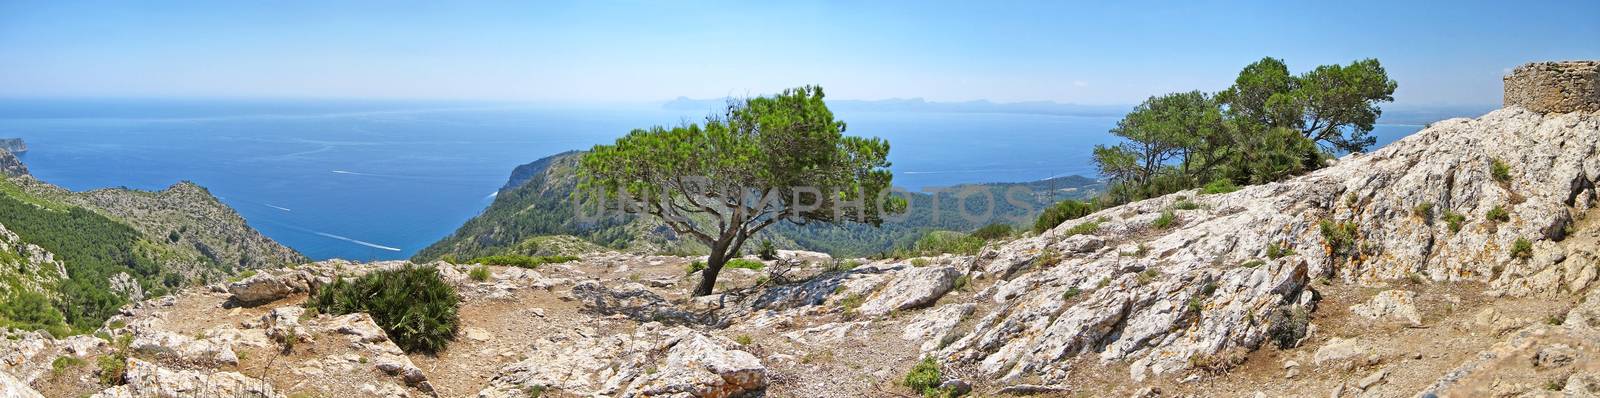 Mediterranean mountain / ocean panorama with tree - horizon / blue water in the background